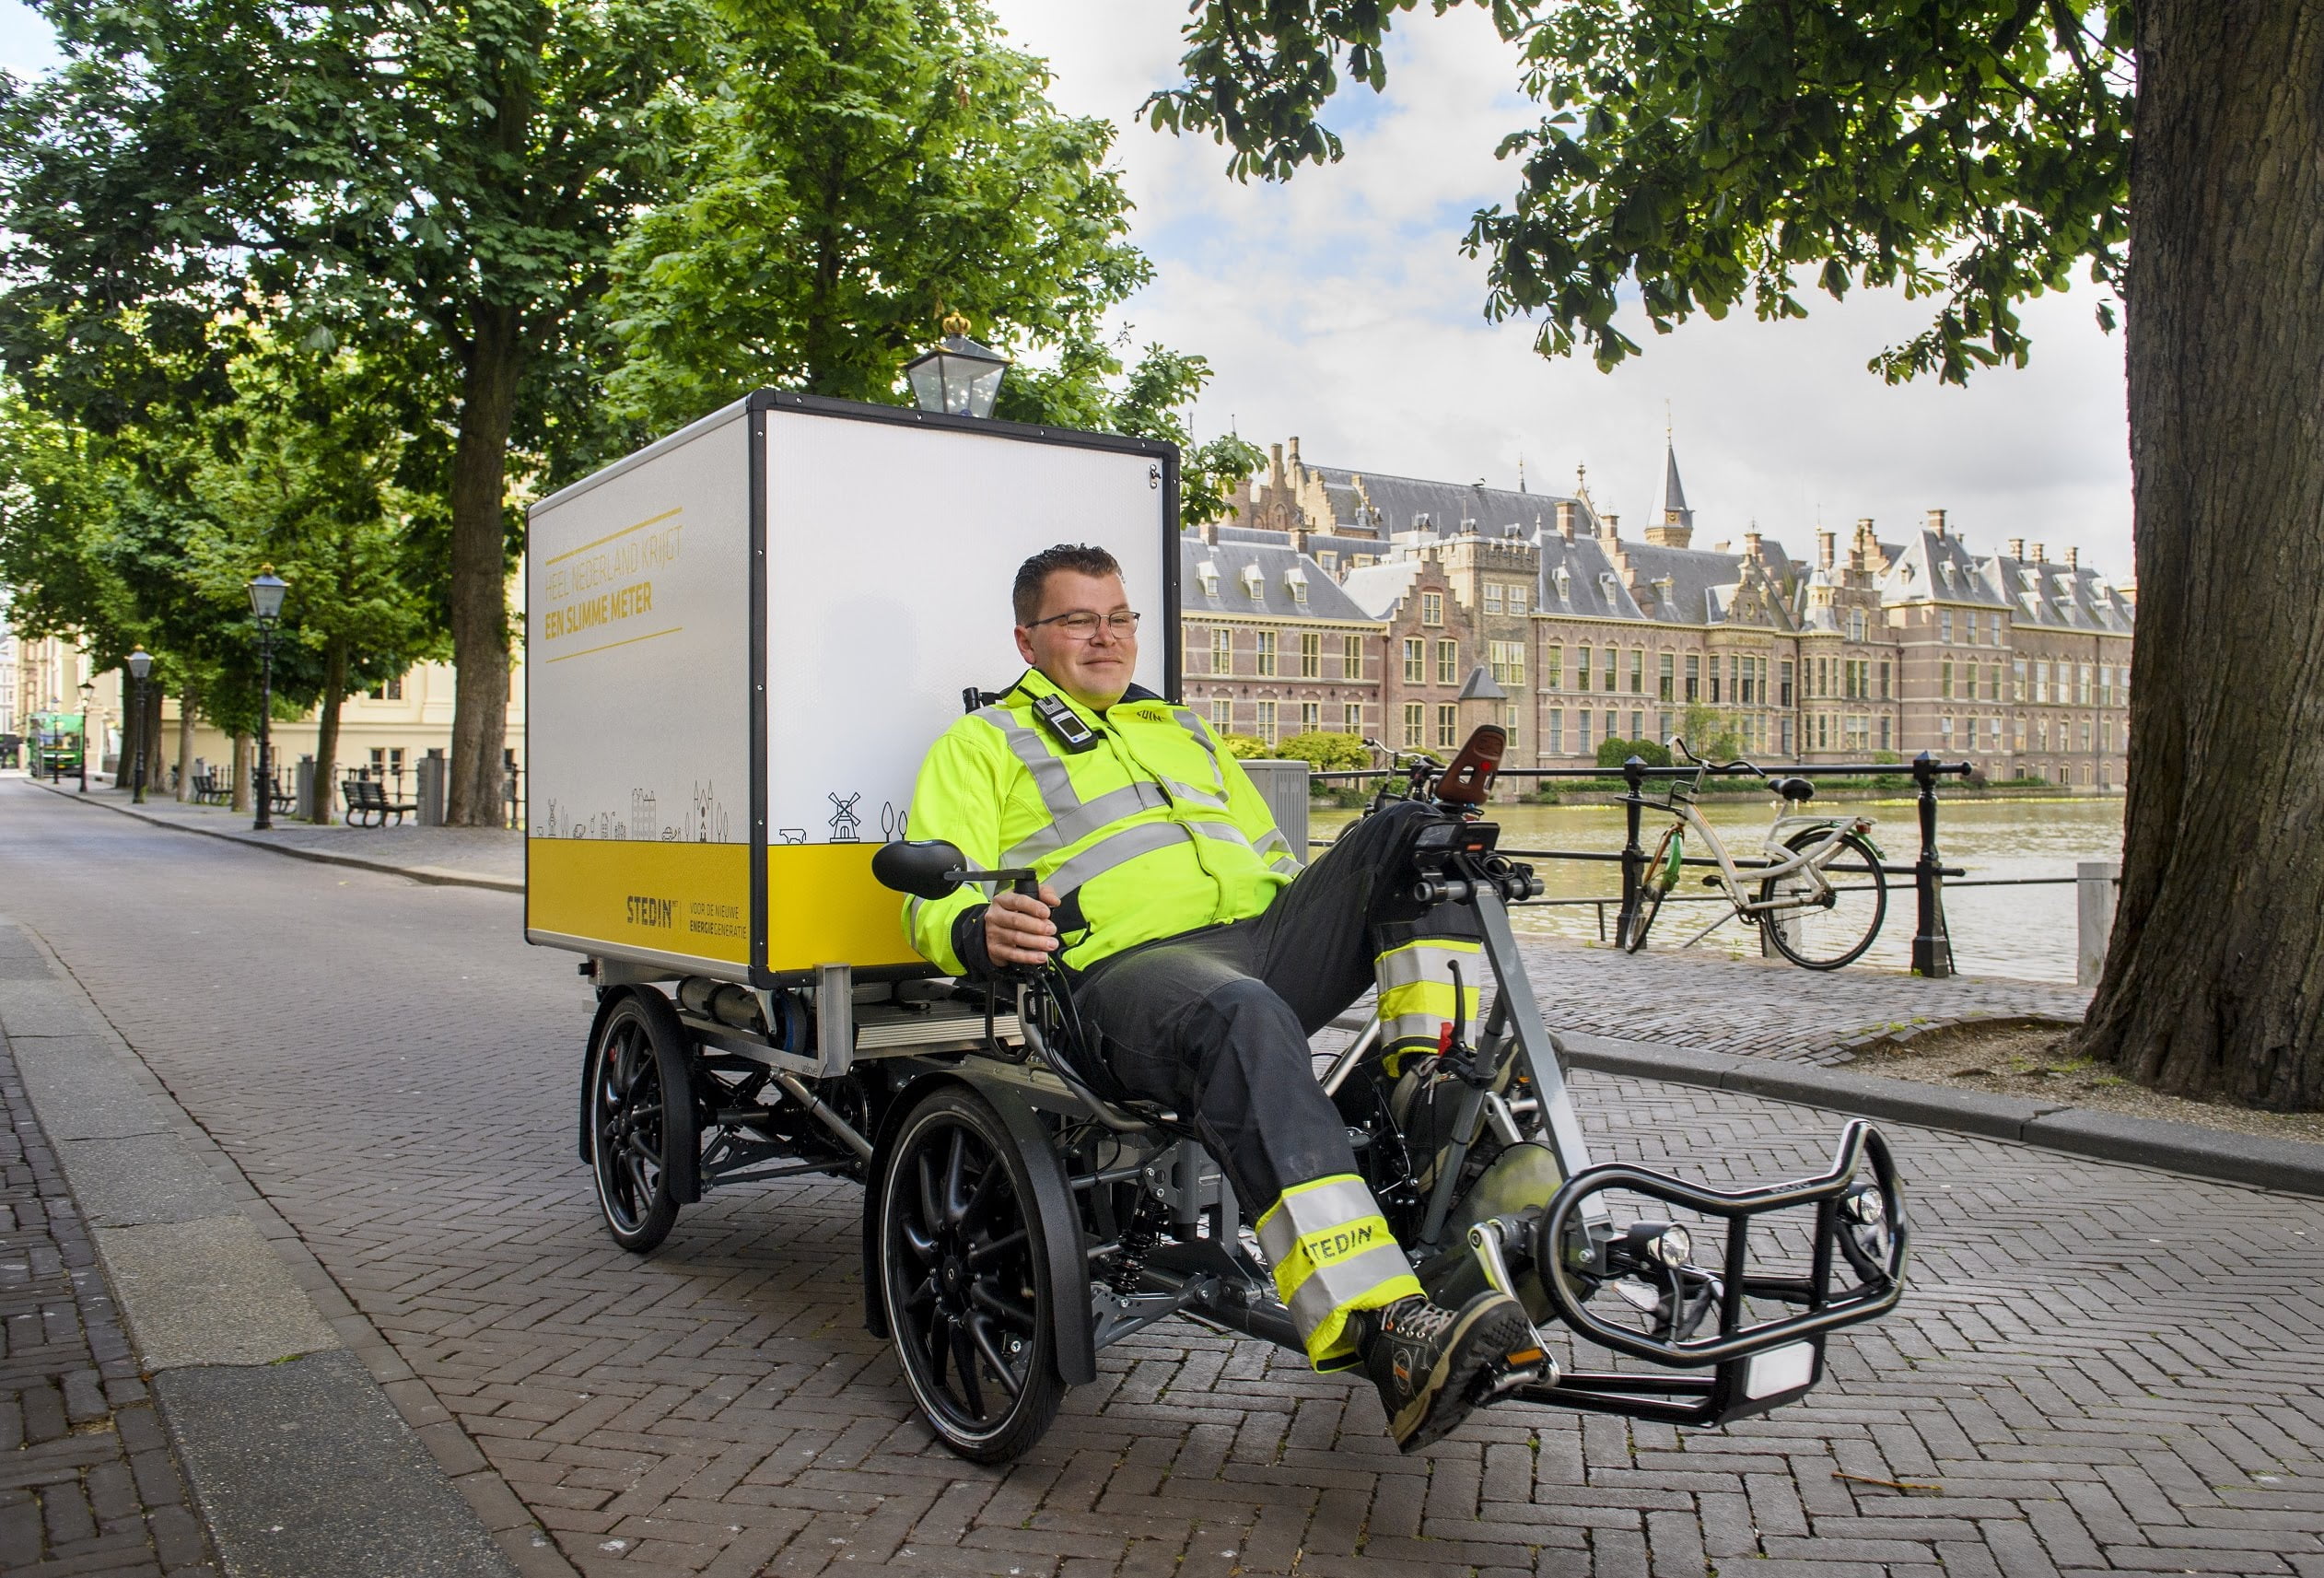 With a cargo bike through The Hague to use smart meters…